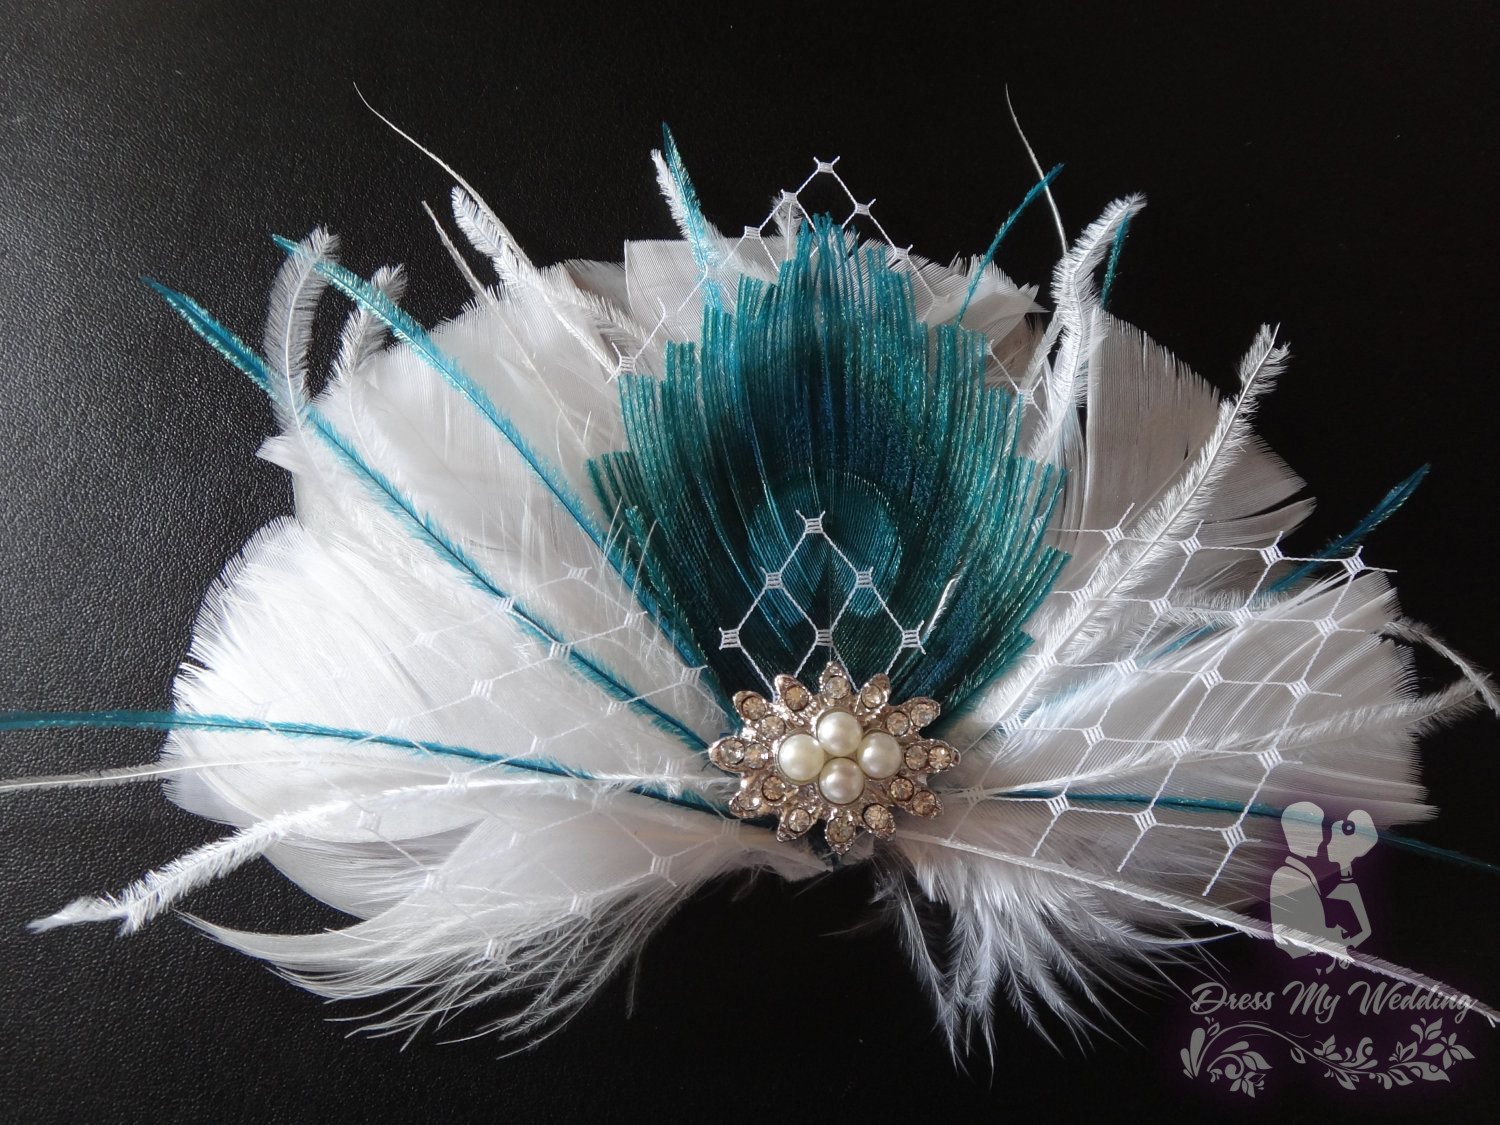 Dress My Wedding Bridal Peacock Feather Hair Piece Customize To Match Your Wedding Colors